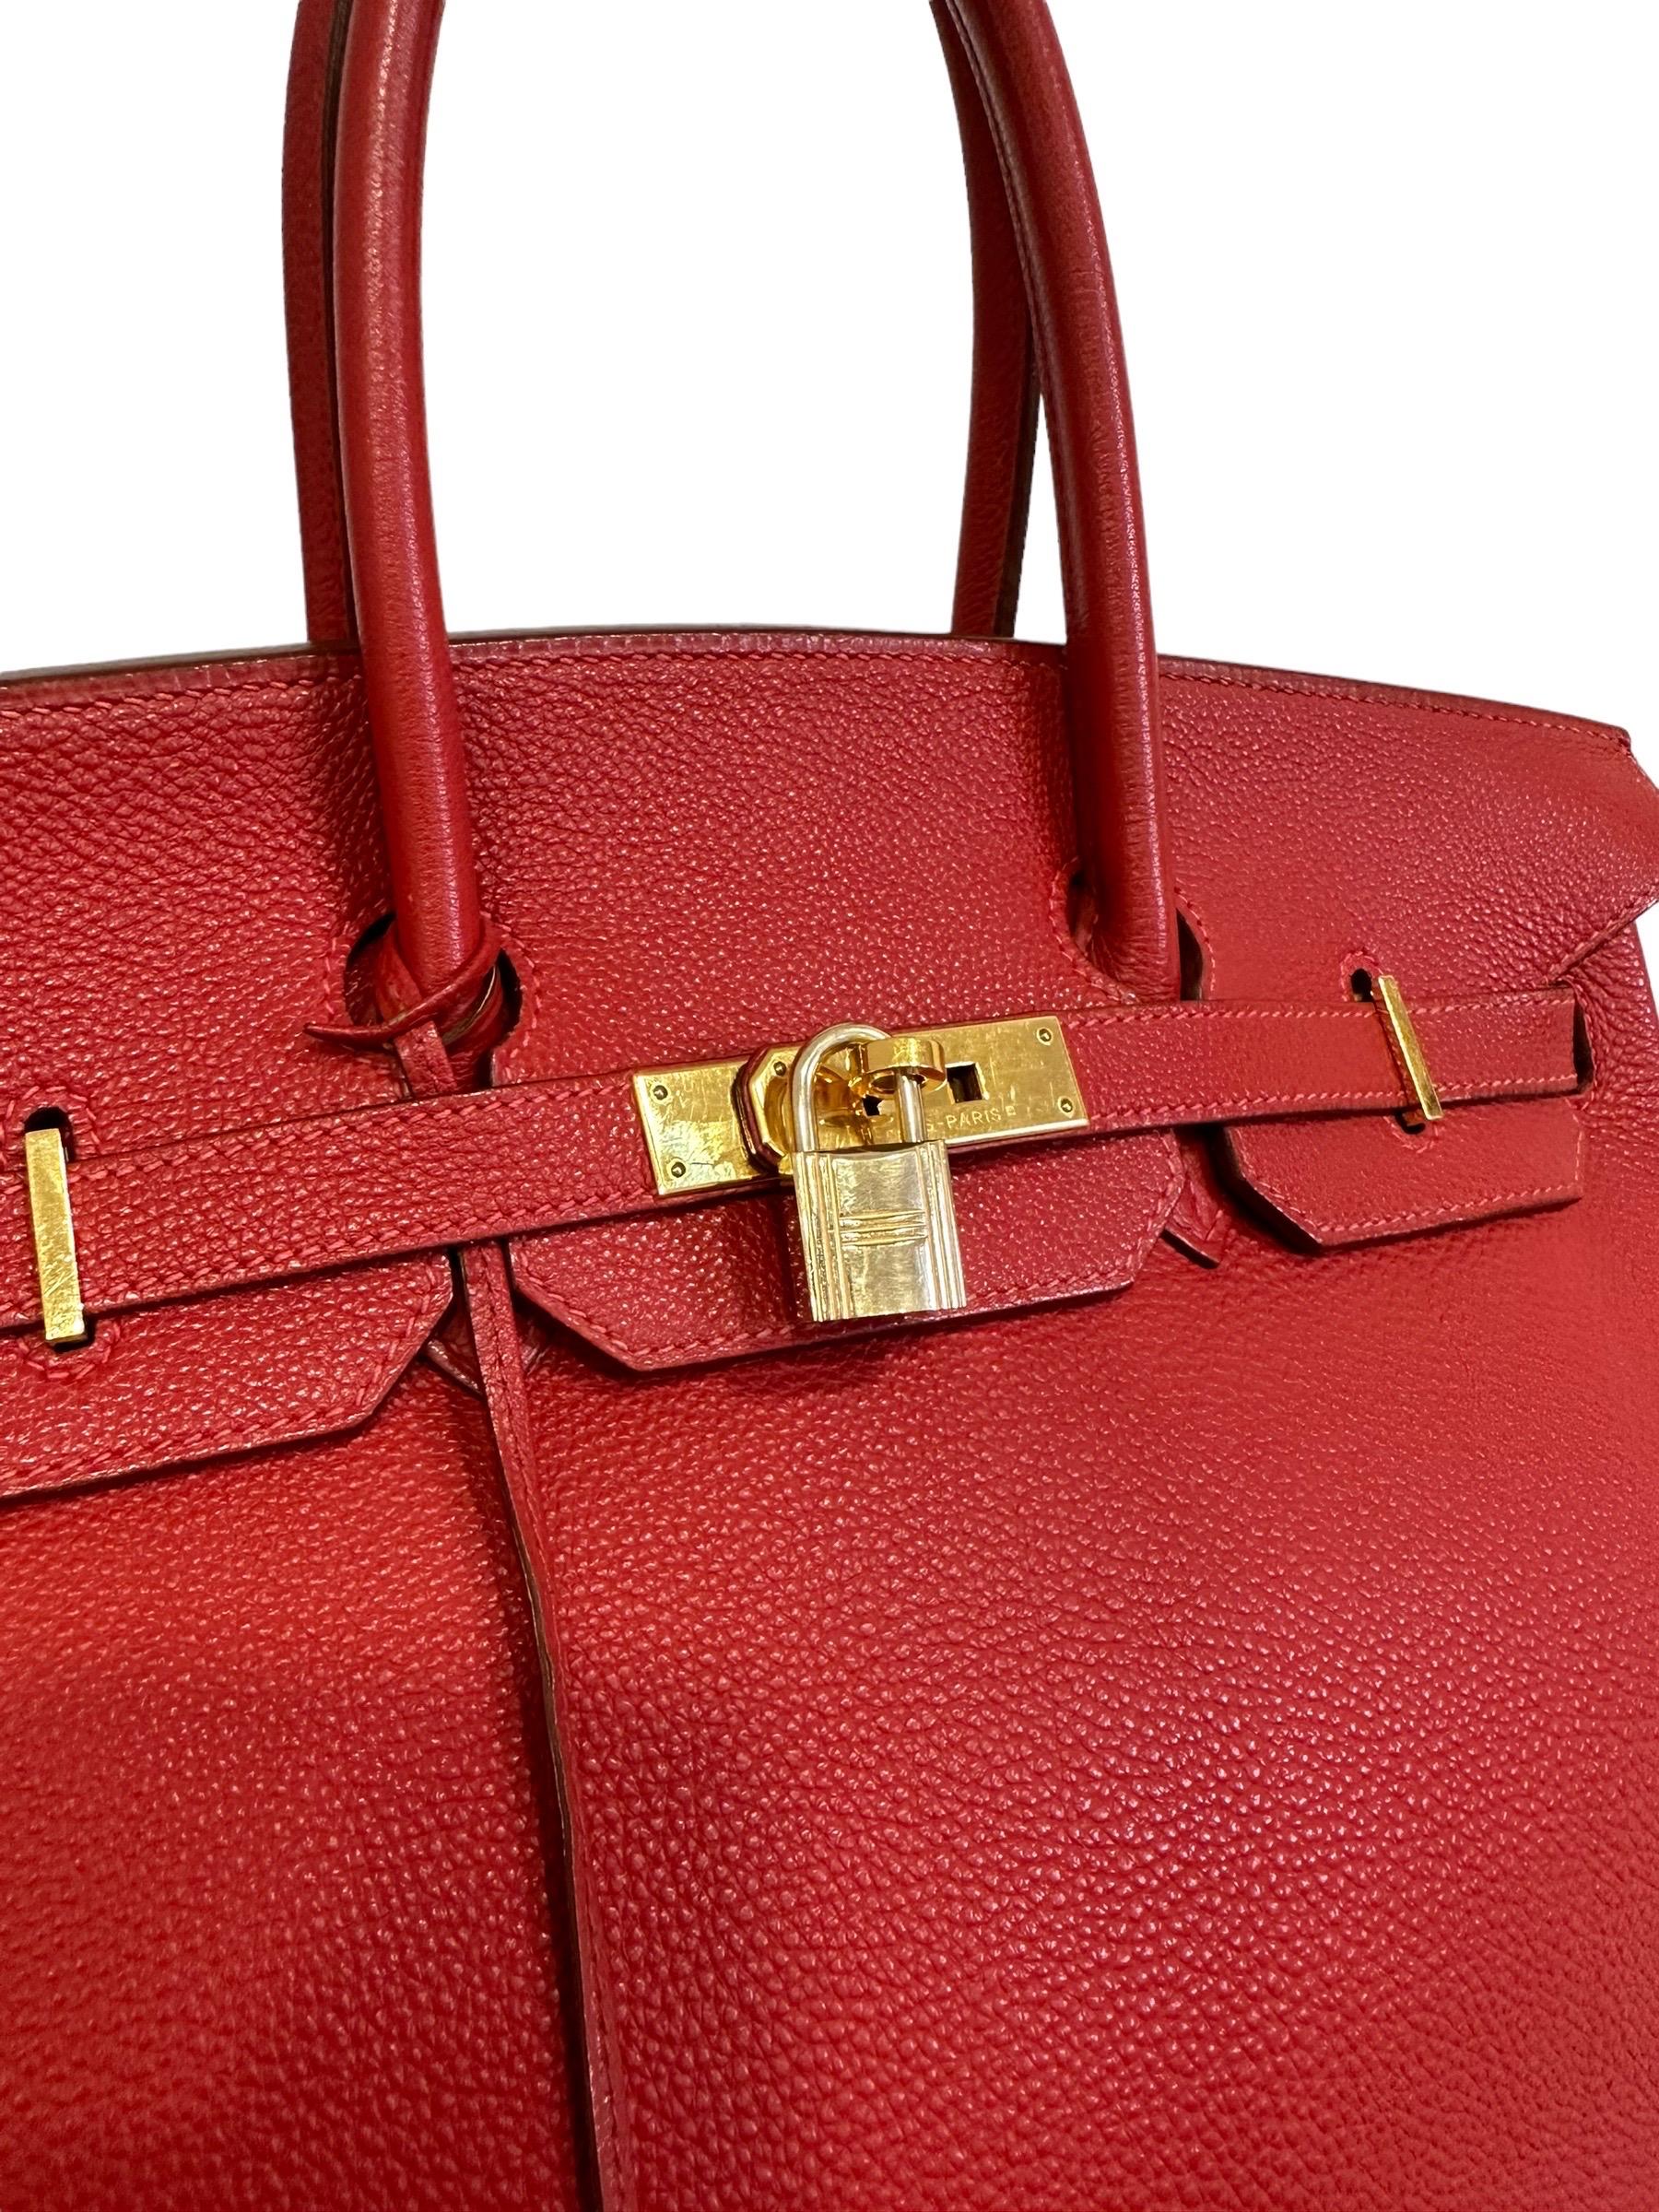 Hermès handbag, Birkin model, size 35, made in Geranium red Fjord leather with gold hardware. Equipped with the classic flap with interlocking closure with horizontal band. Equipped with padlock with clochette and keys. Double rigid hand handle and